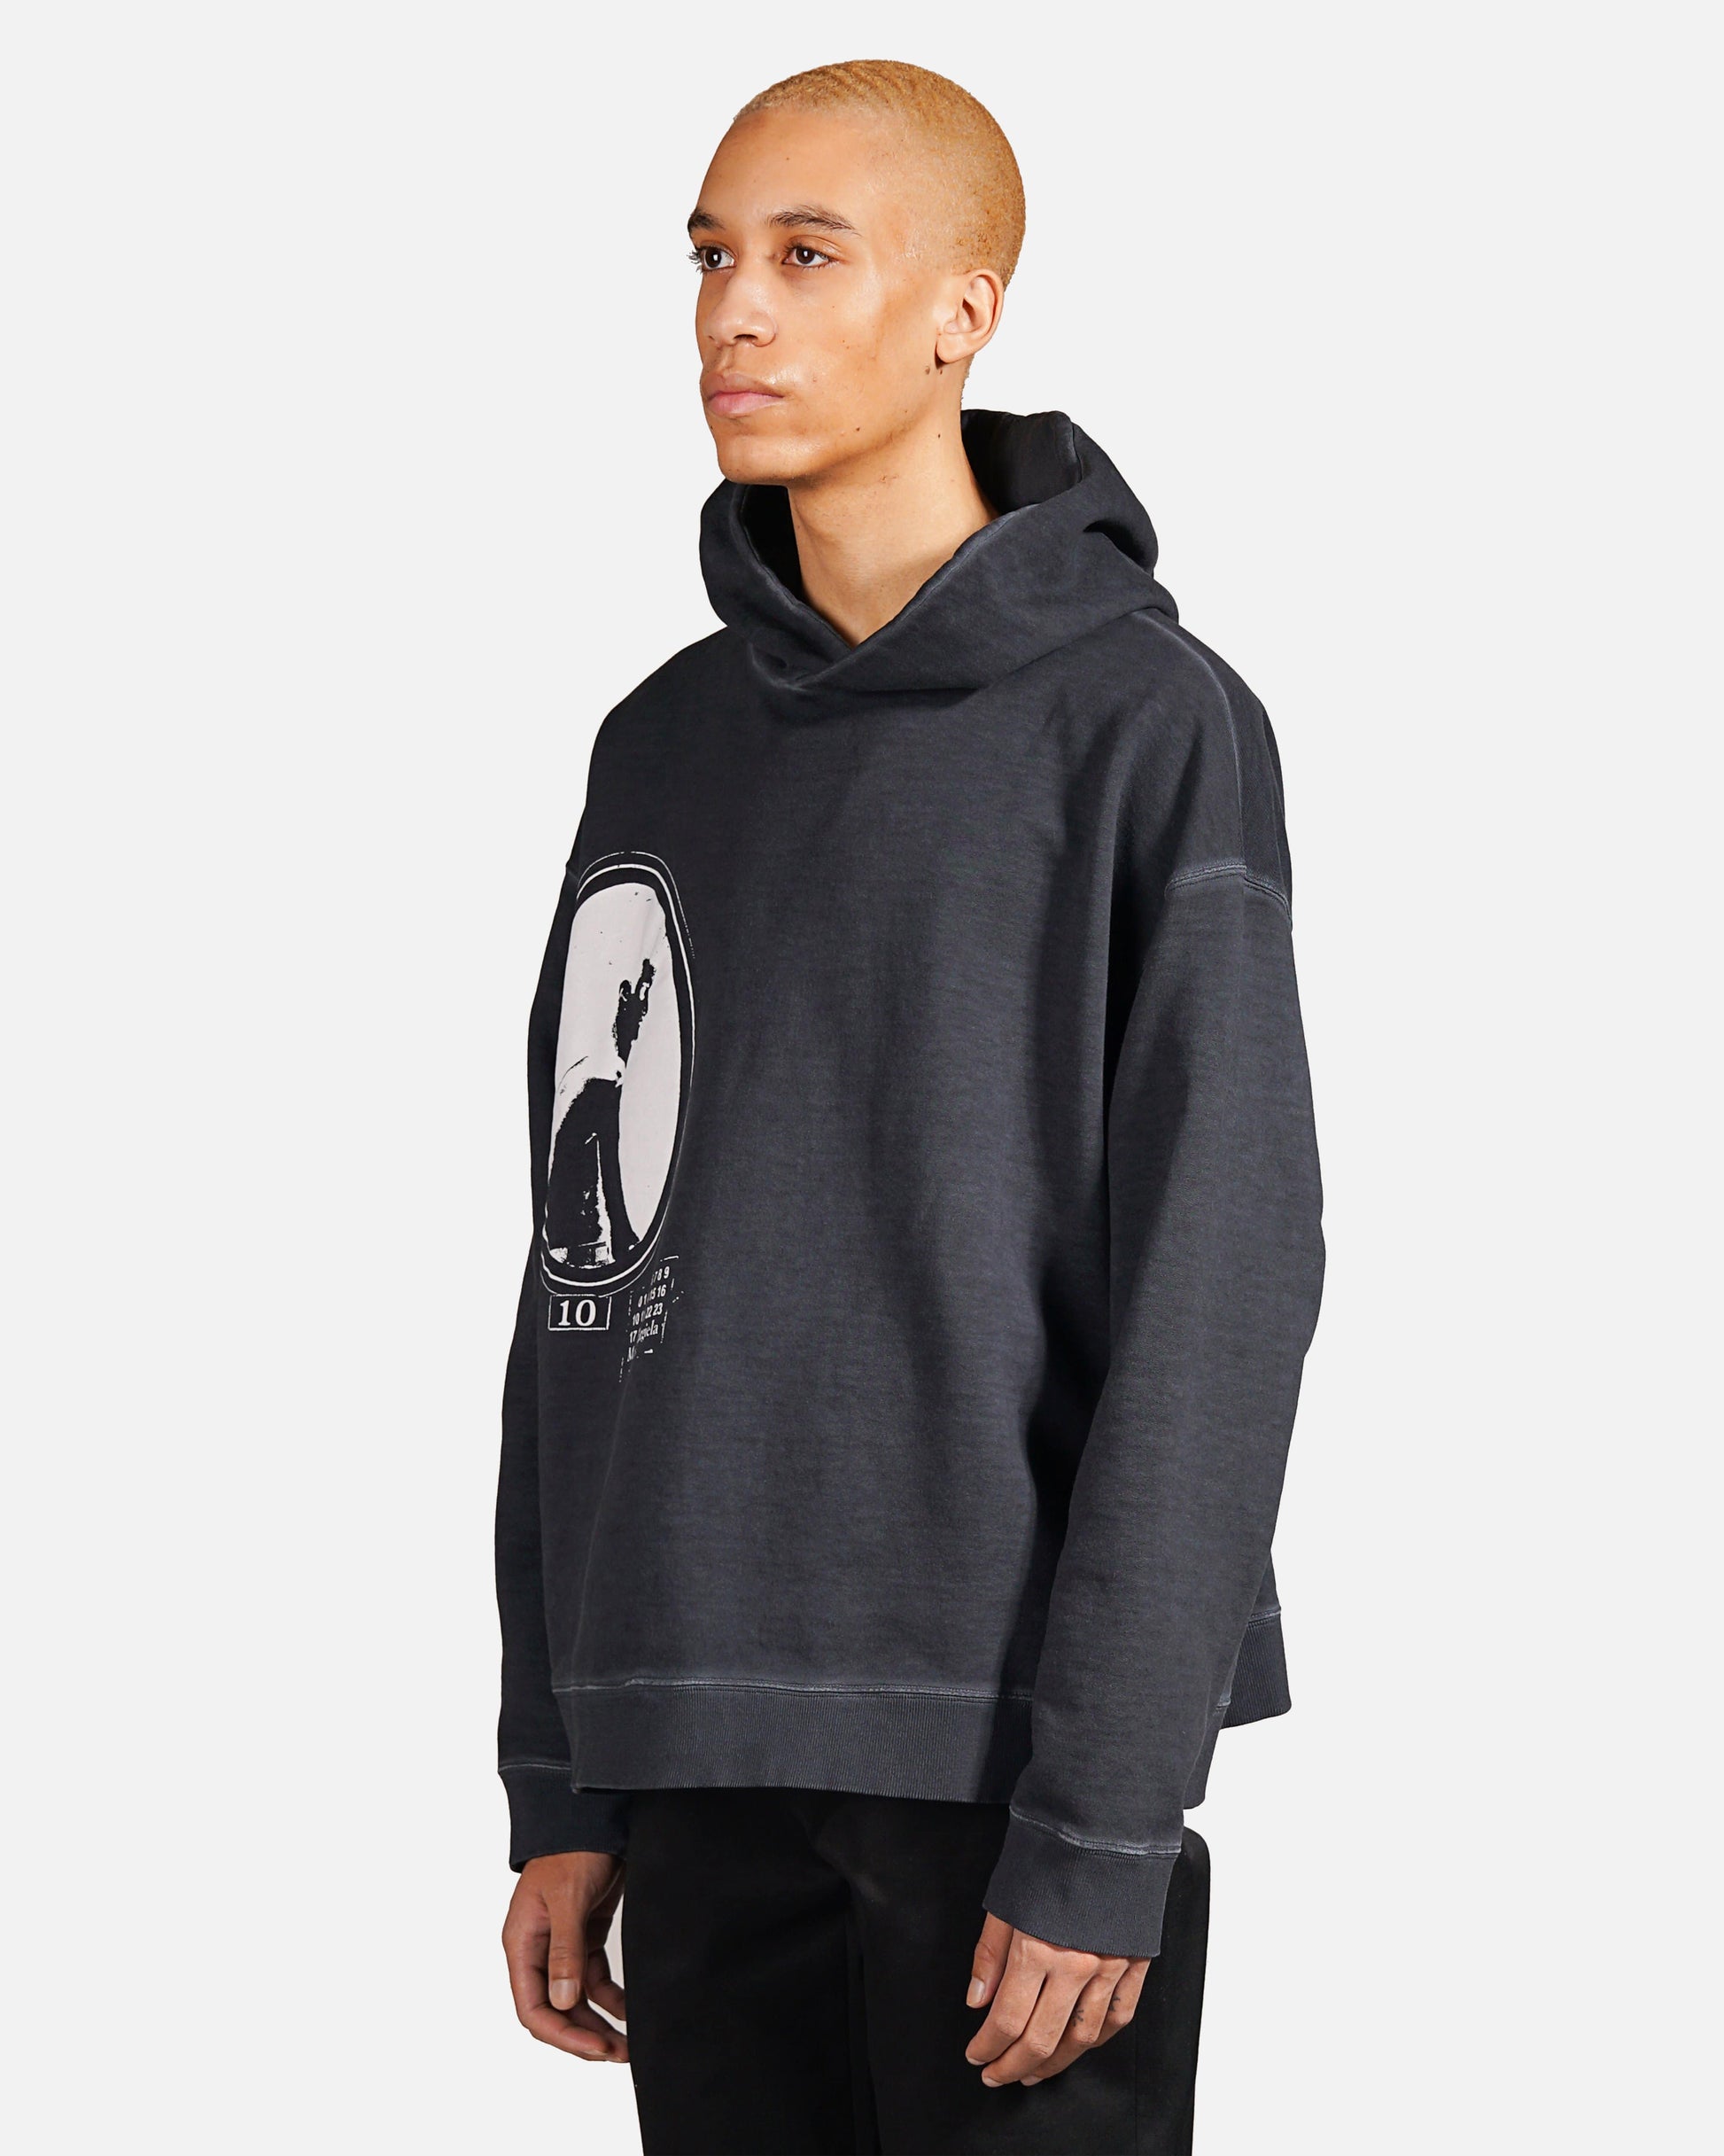 Maison Margiela Men's T-Shirts Silhouette Print Hoodie in Anthracite